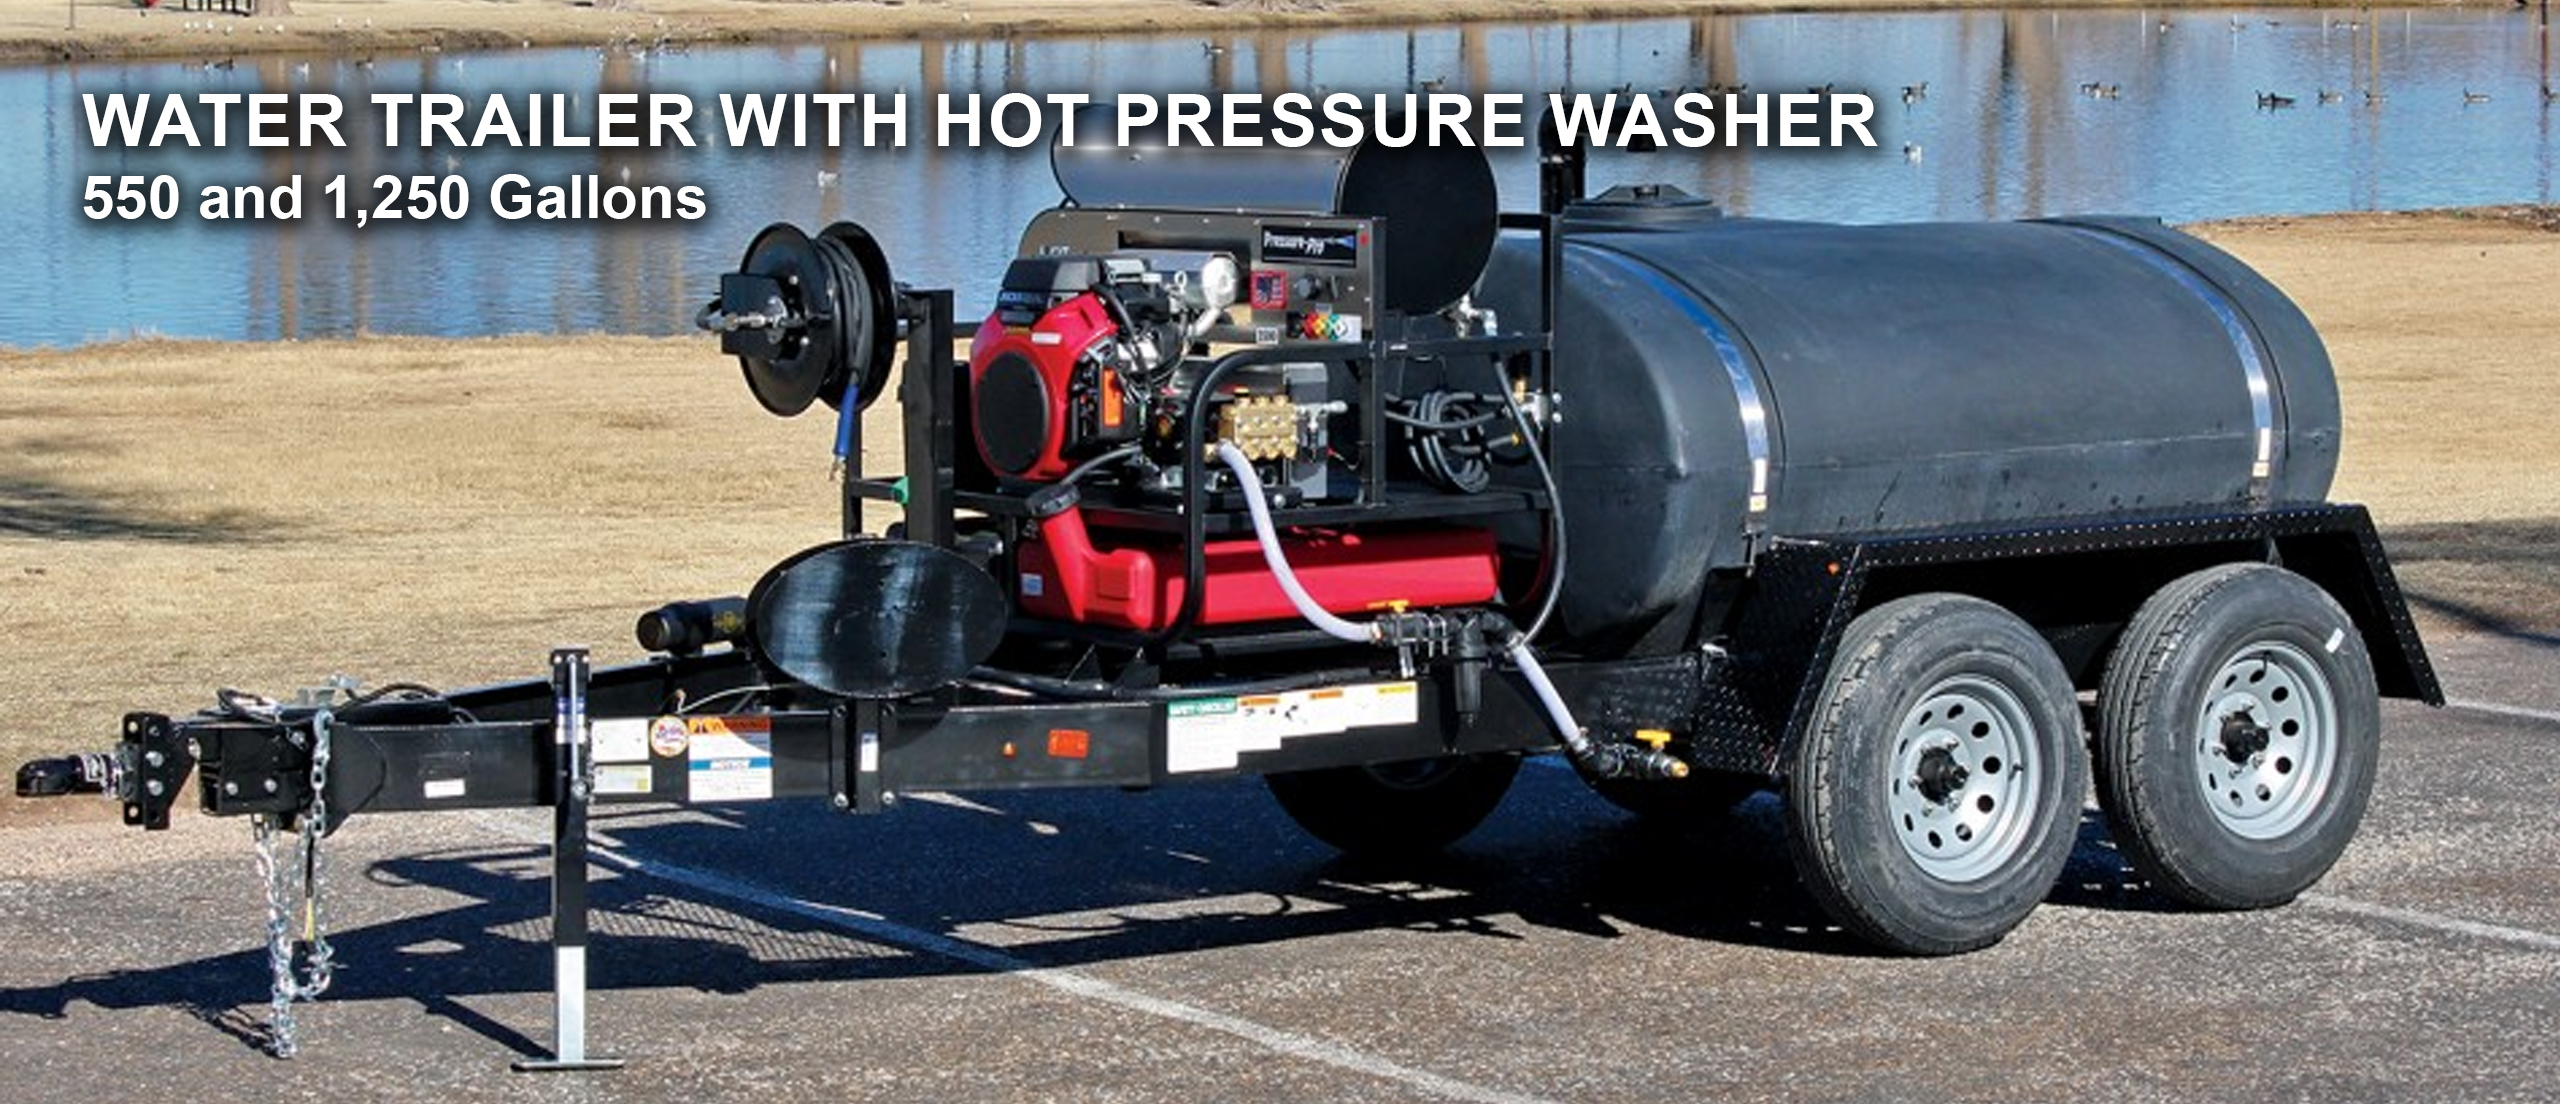 water-trailer-with-hot-pressure-washer-banner